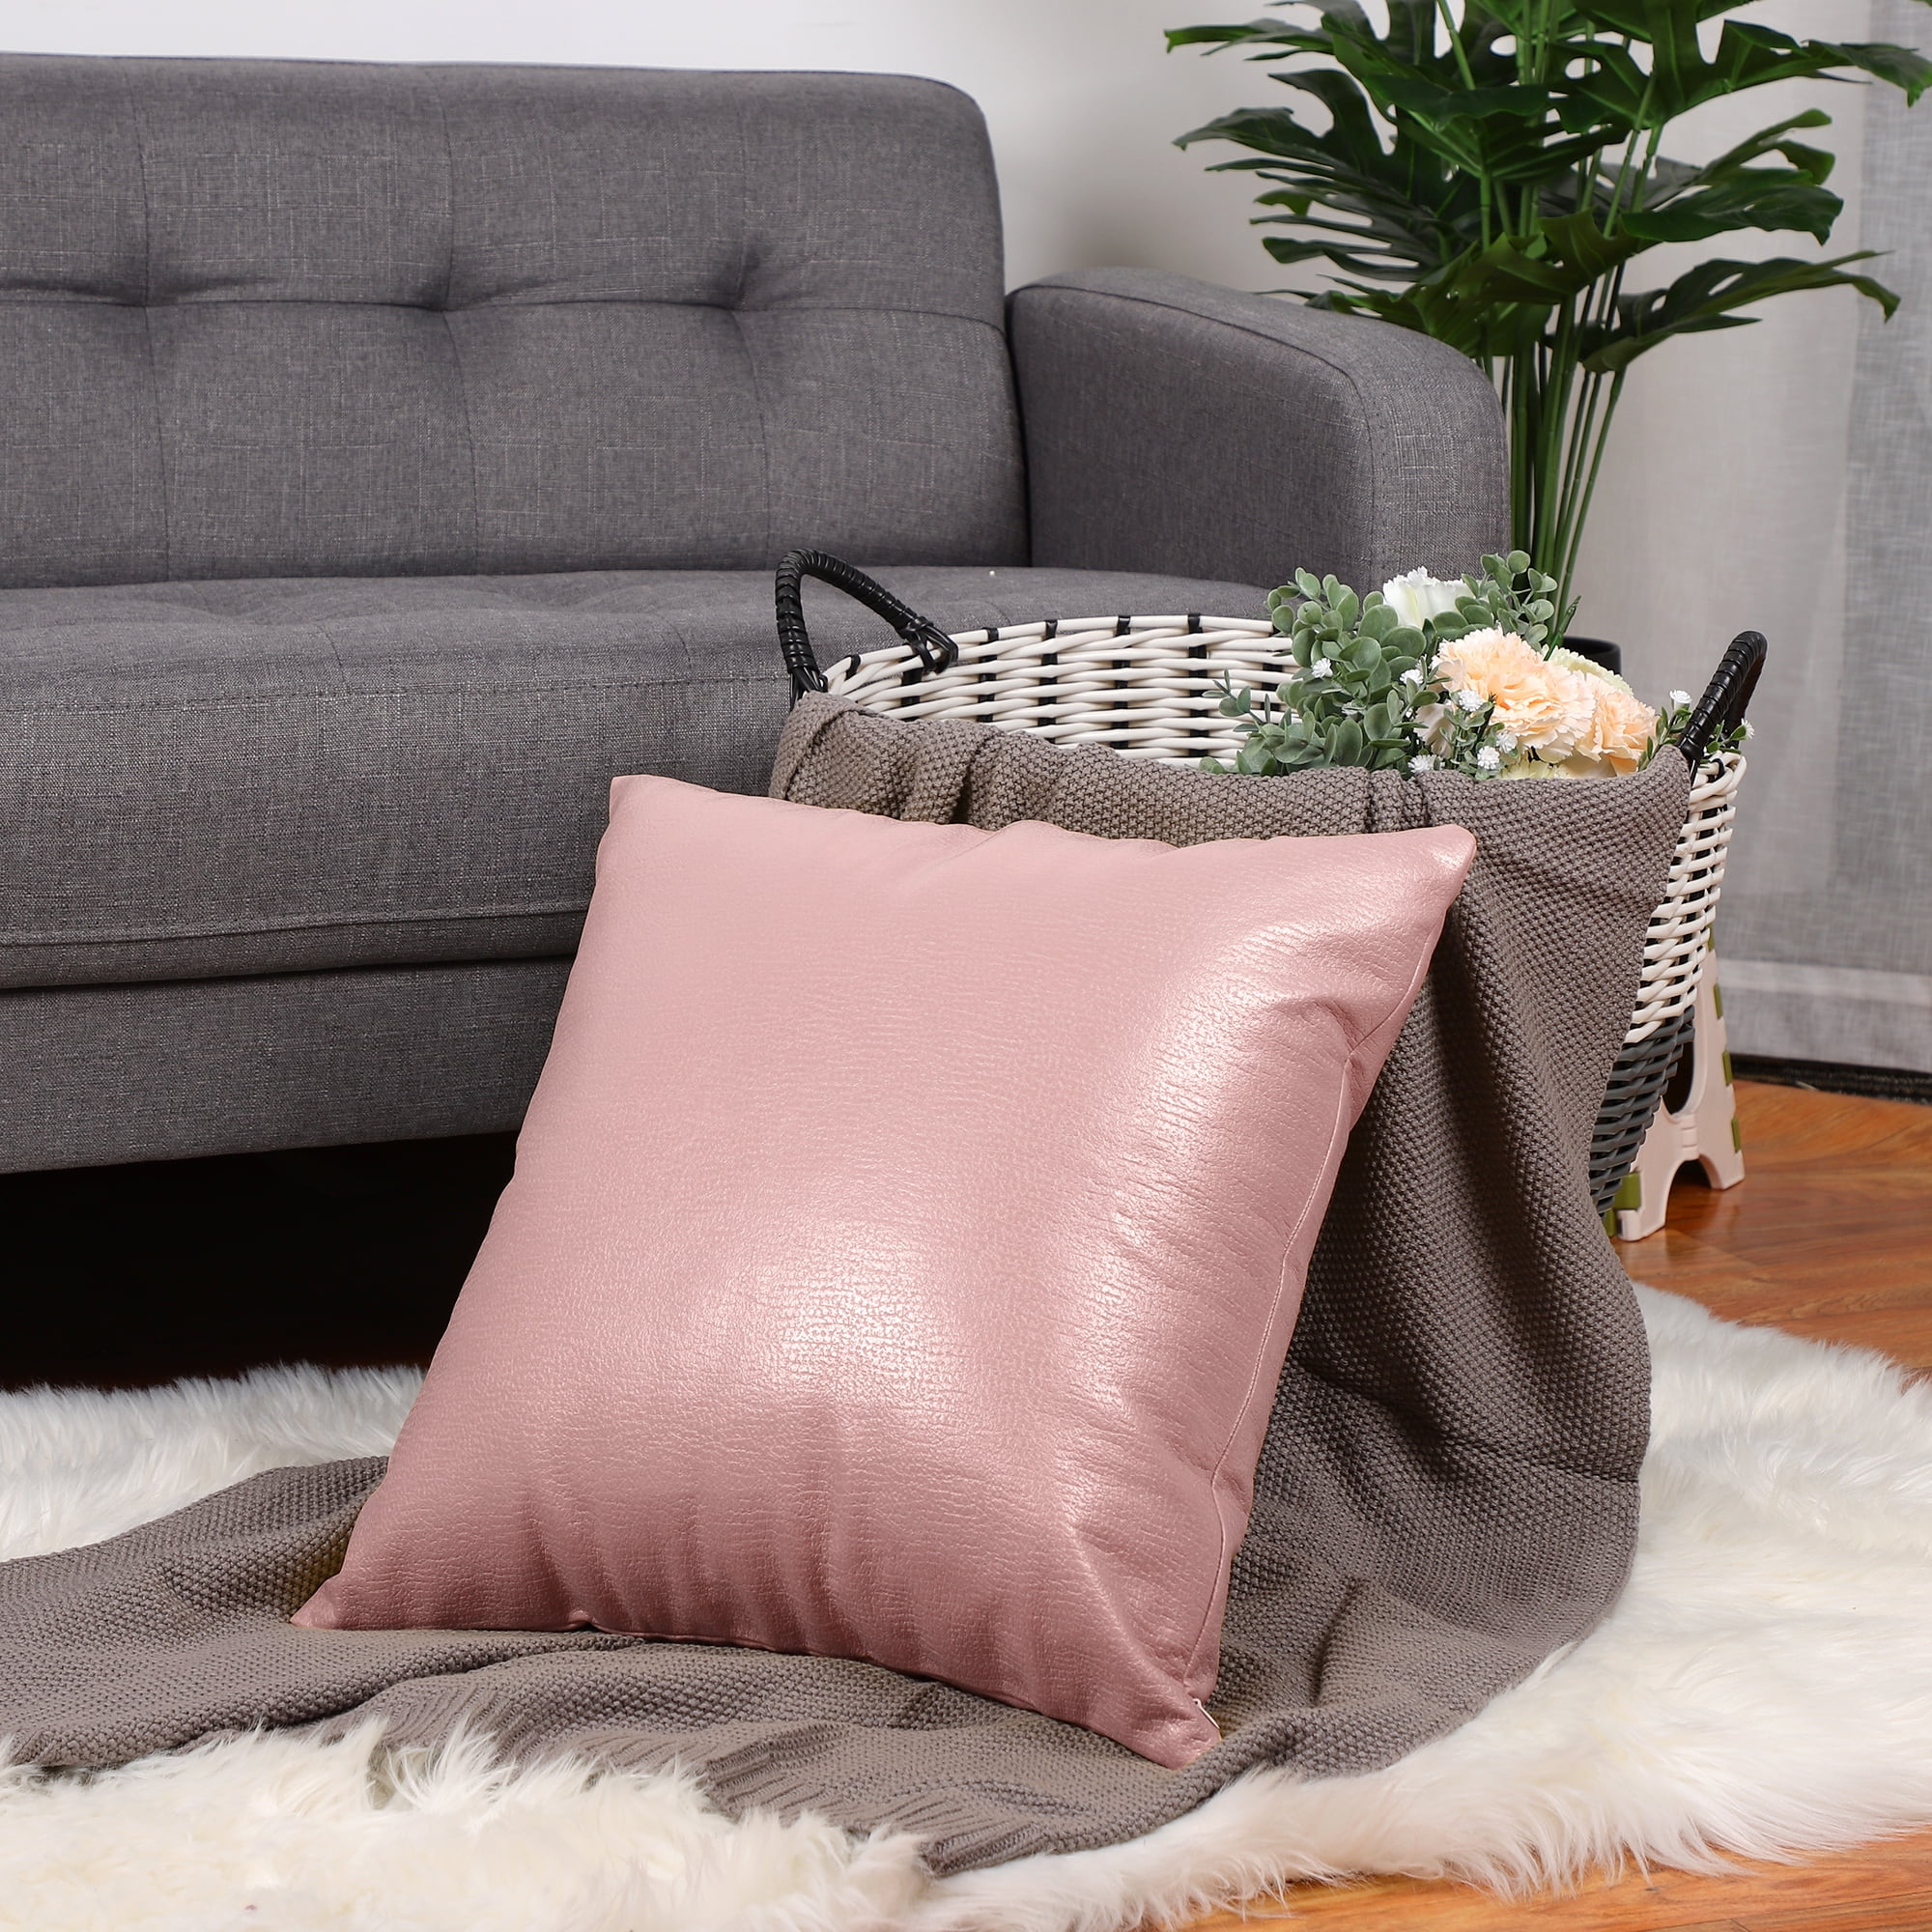 Throw Cushion Covers, Brown Faux Leather Couch Cushion Covers